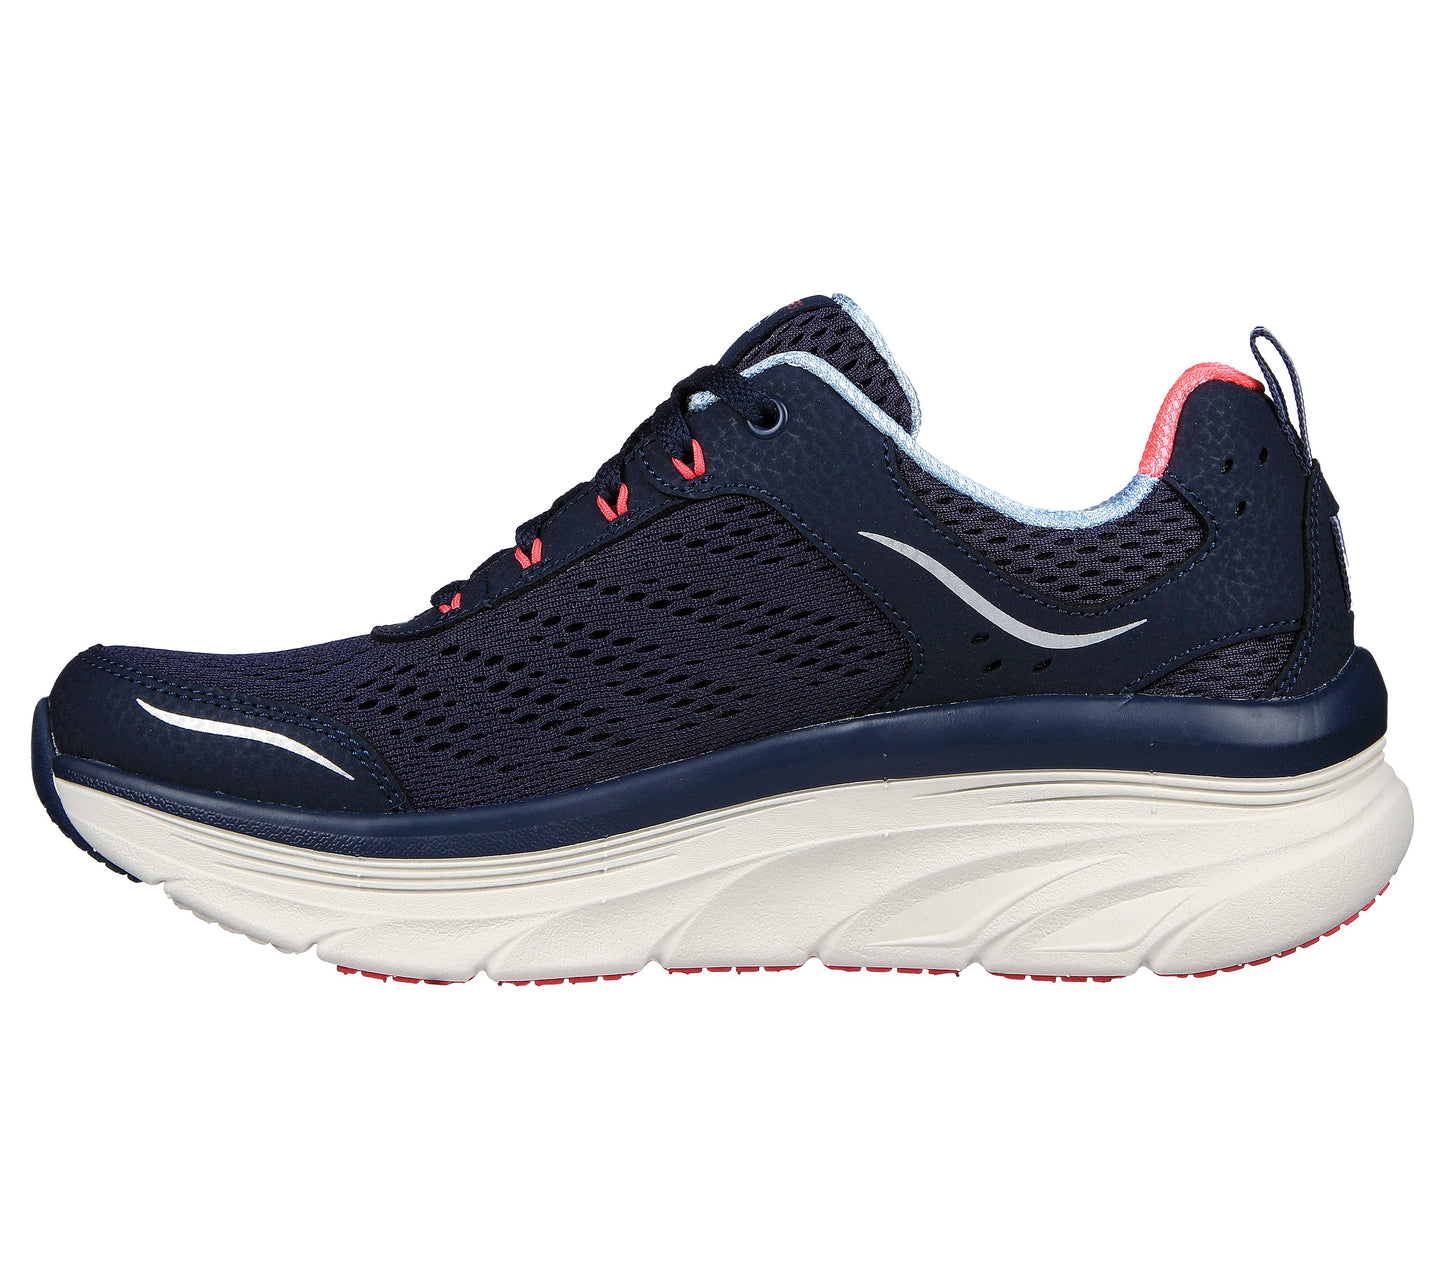 Skechers Relaxed Fit: D'Lux Walker - Infinite Motion Mujer